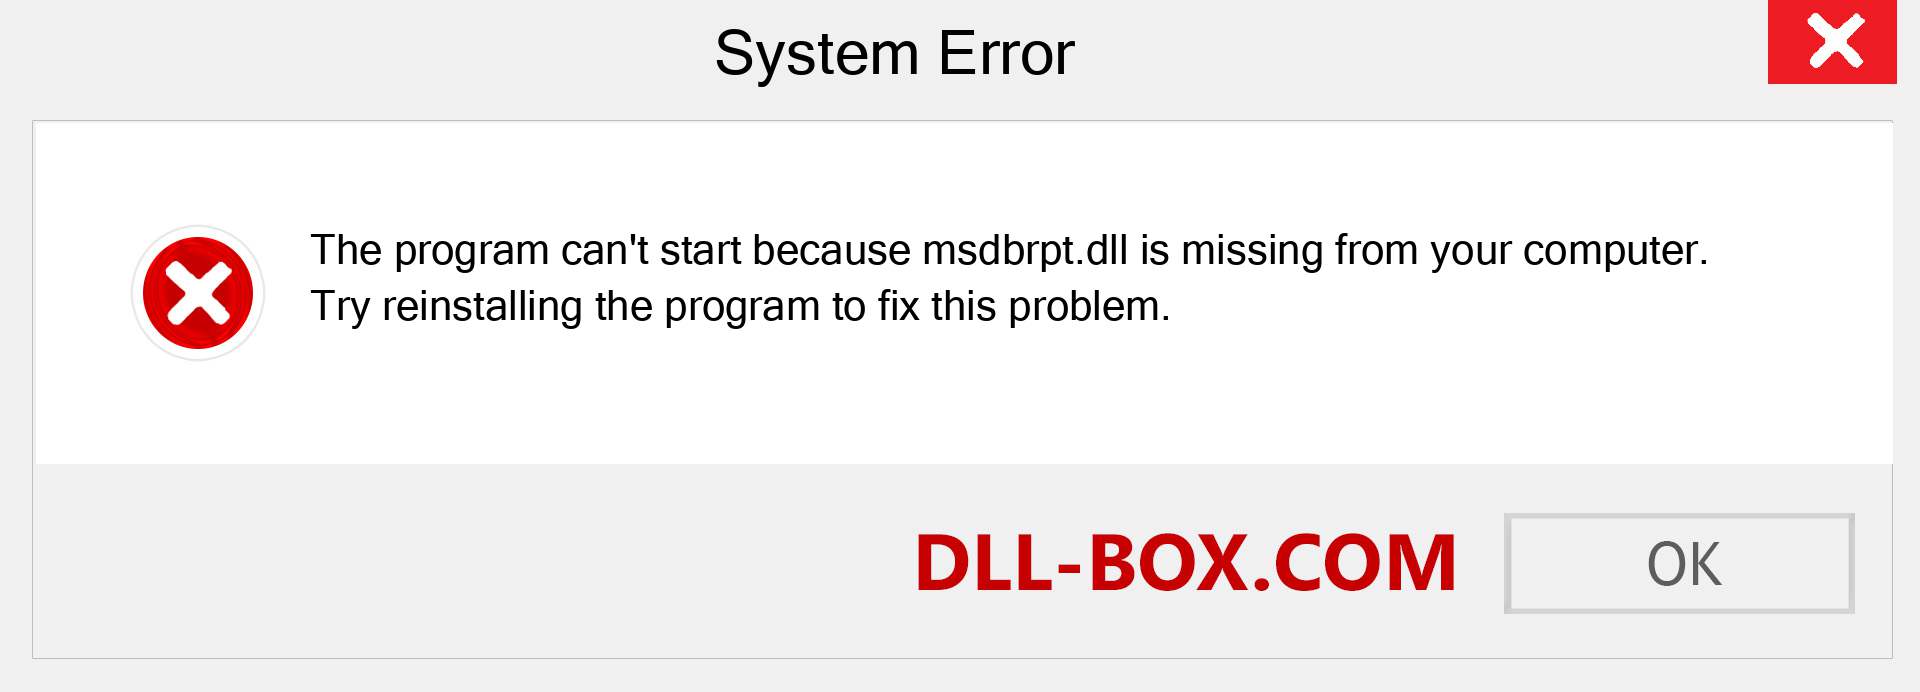  msdbrpt.dll file is missing?. Download for Windows 7, 8, 10 - Fix  msdbrpt dll Missing Error on Windows, photos, images